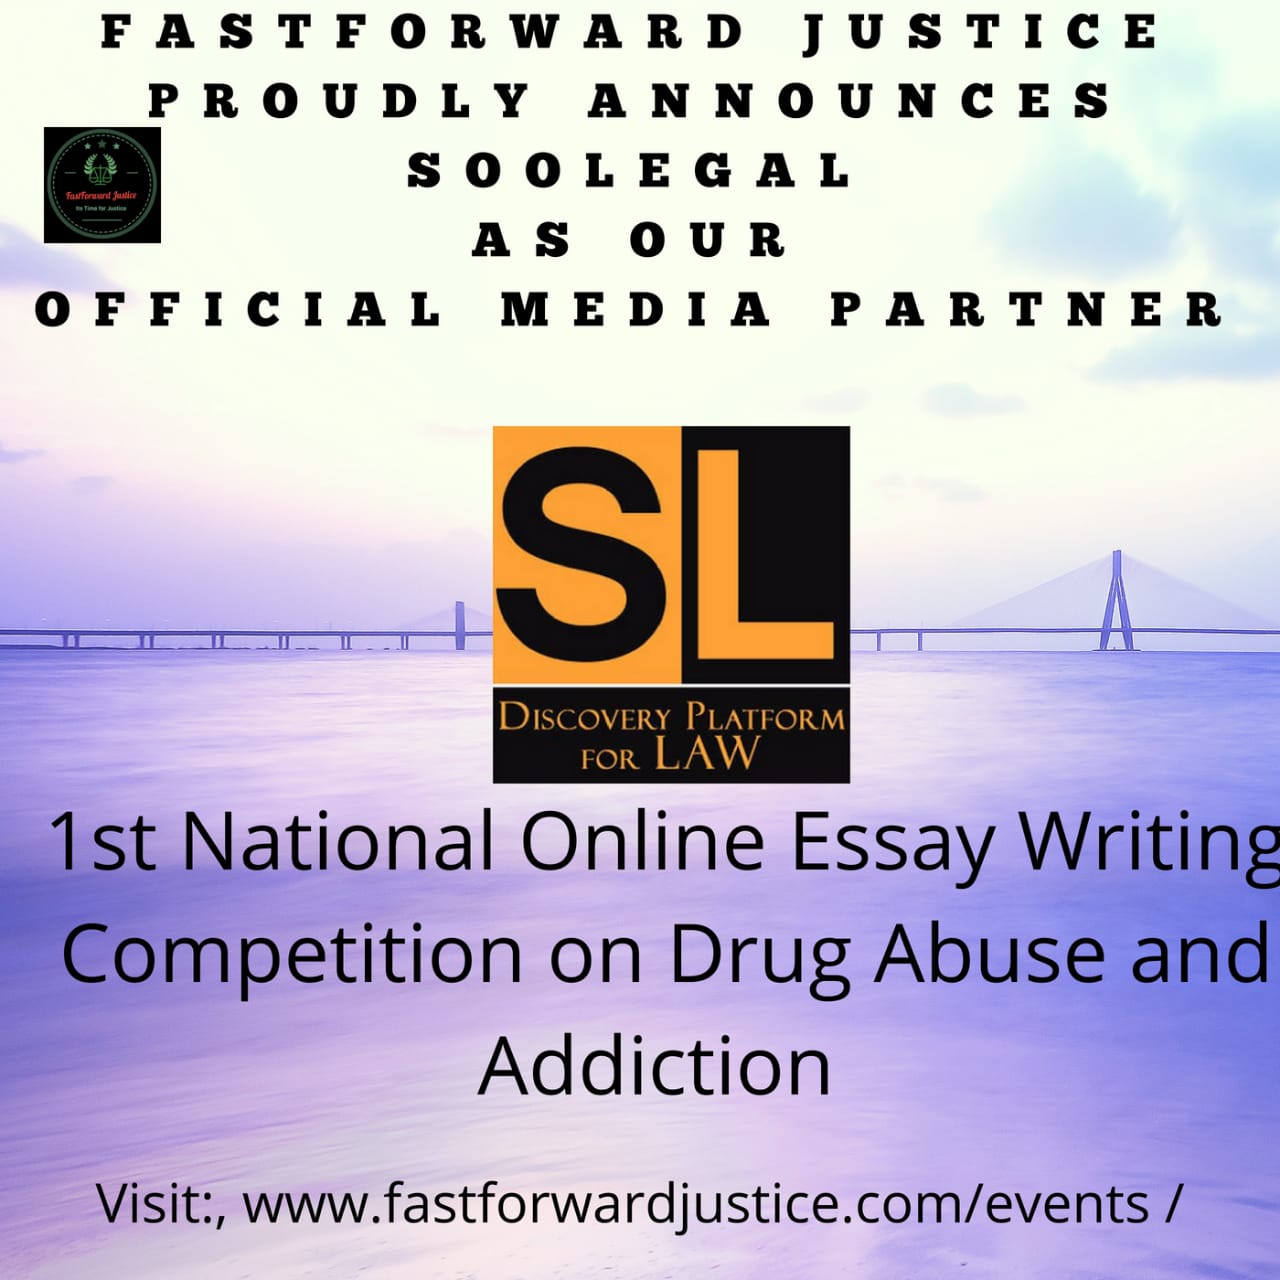 FASTFORWARD JUSTICE’S 1ST NATIONAL ESSAY WRITING COMPETITION-2018 ON DRUG ABUSE AND ADDICTION